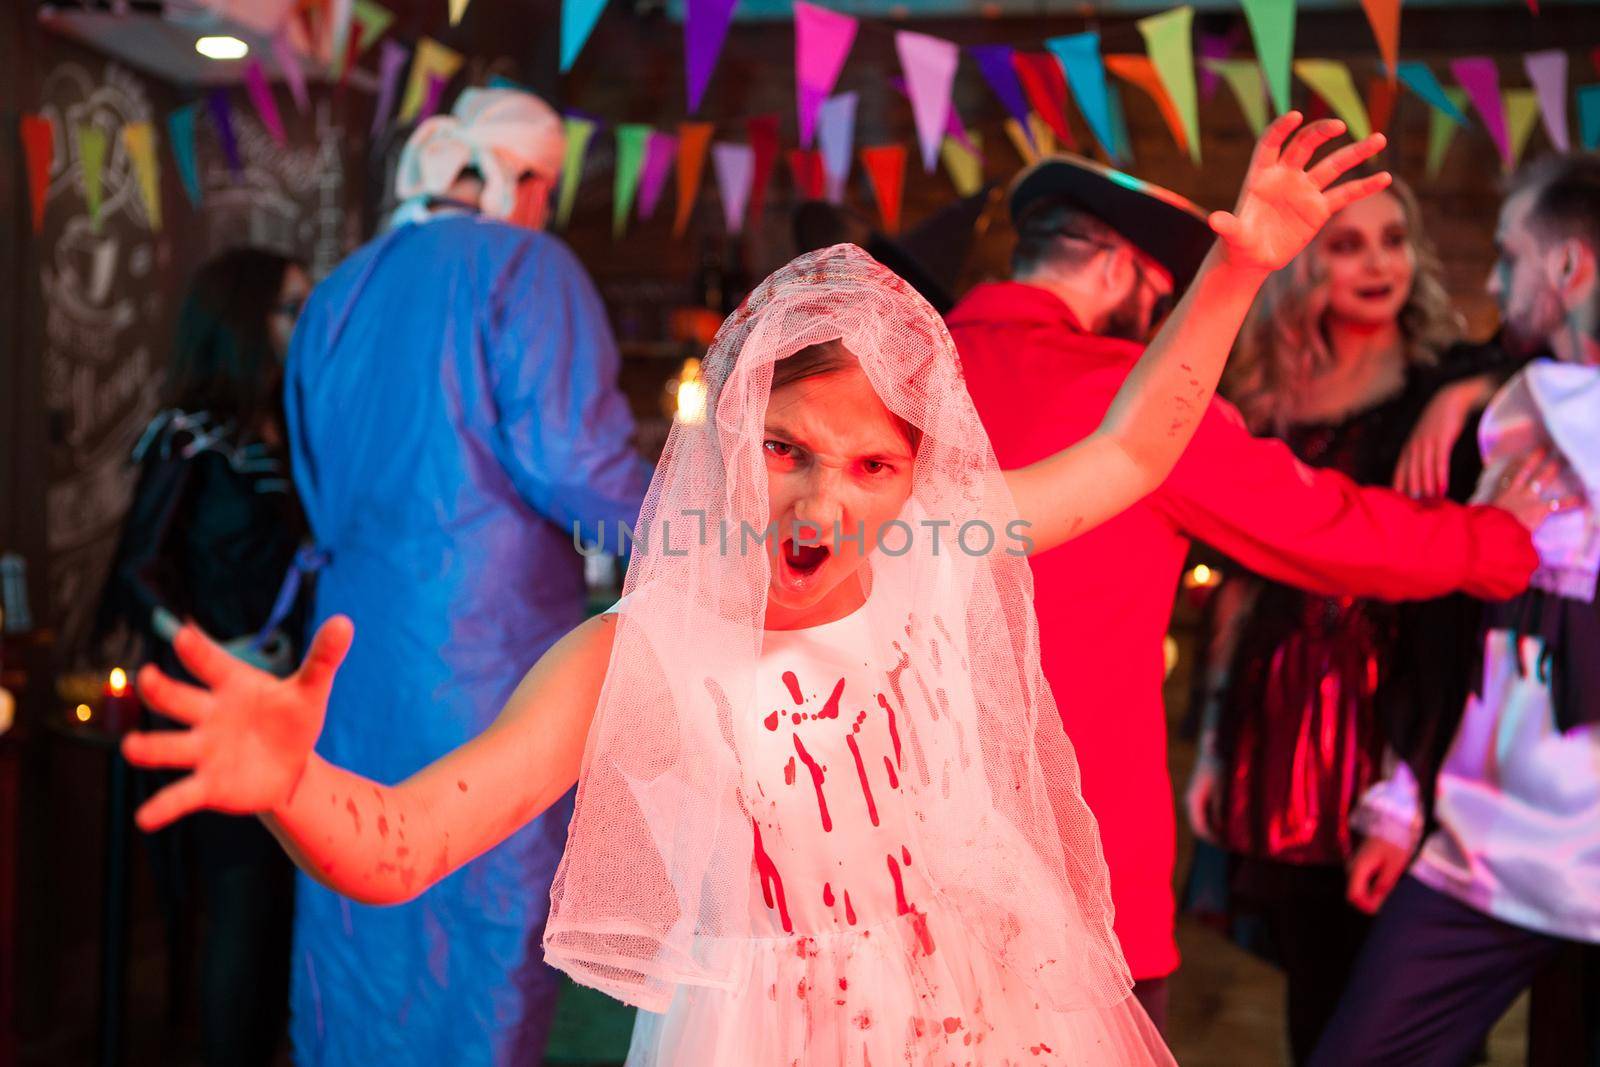 Portrait of little girl screaming dressed up like a bride for halloween by DCStudio